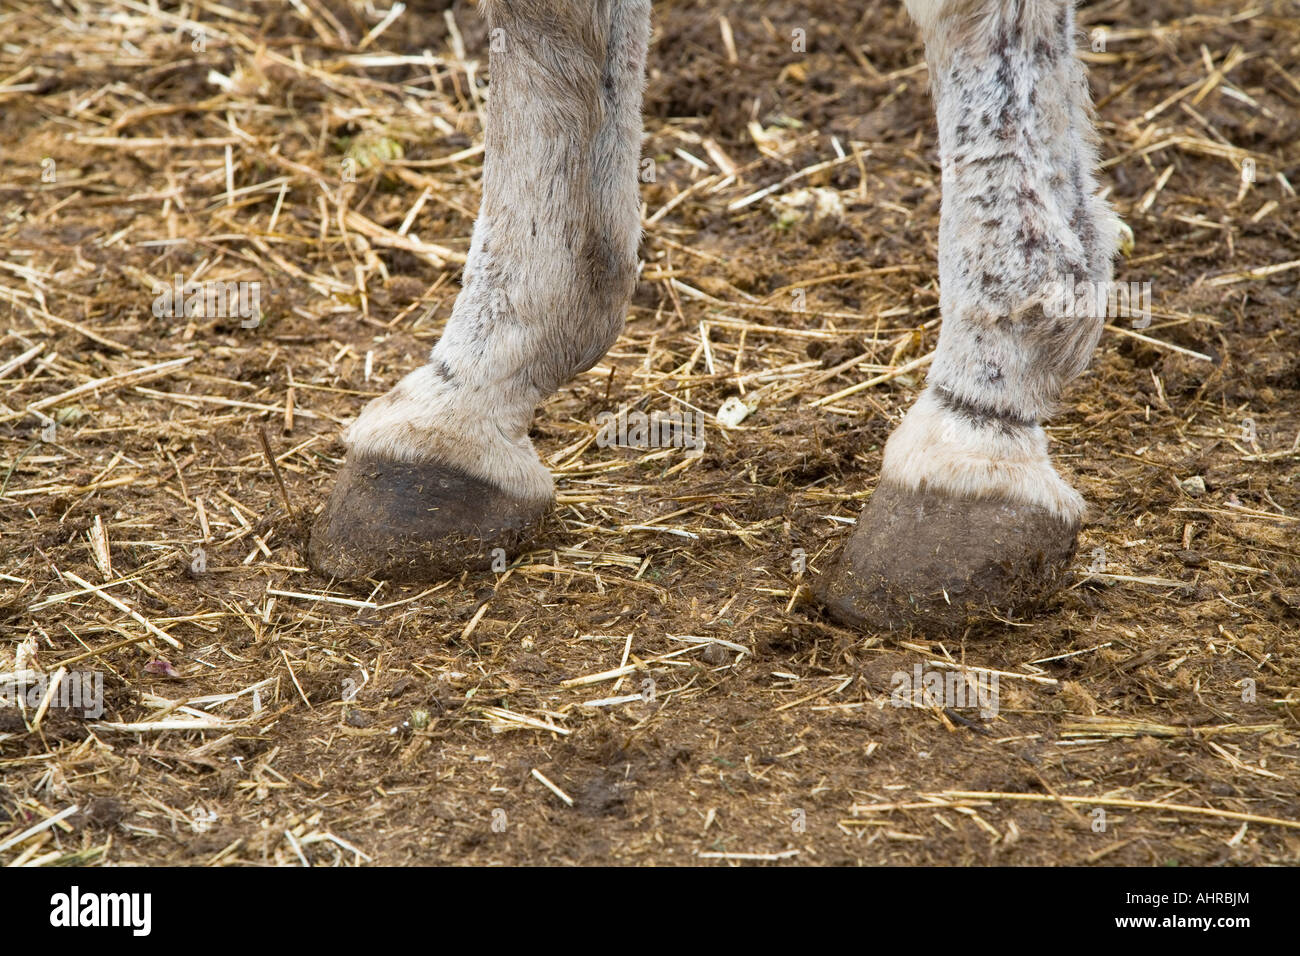 Donkey hooves in straw and dirt Stock Photo